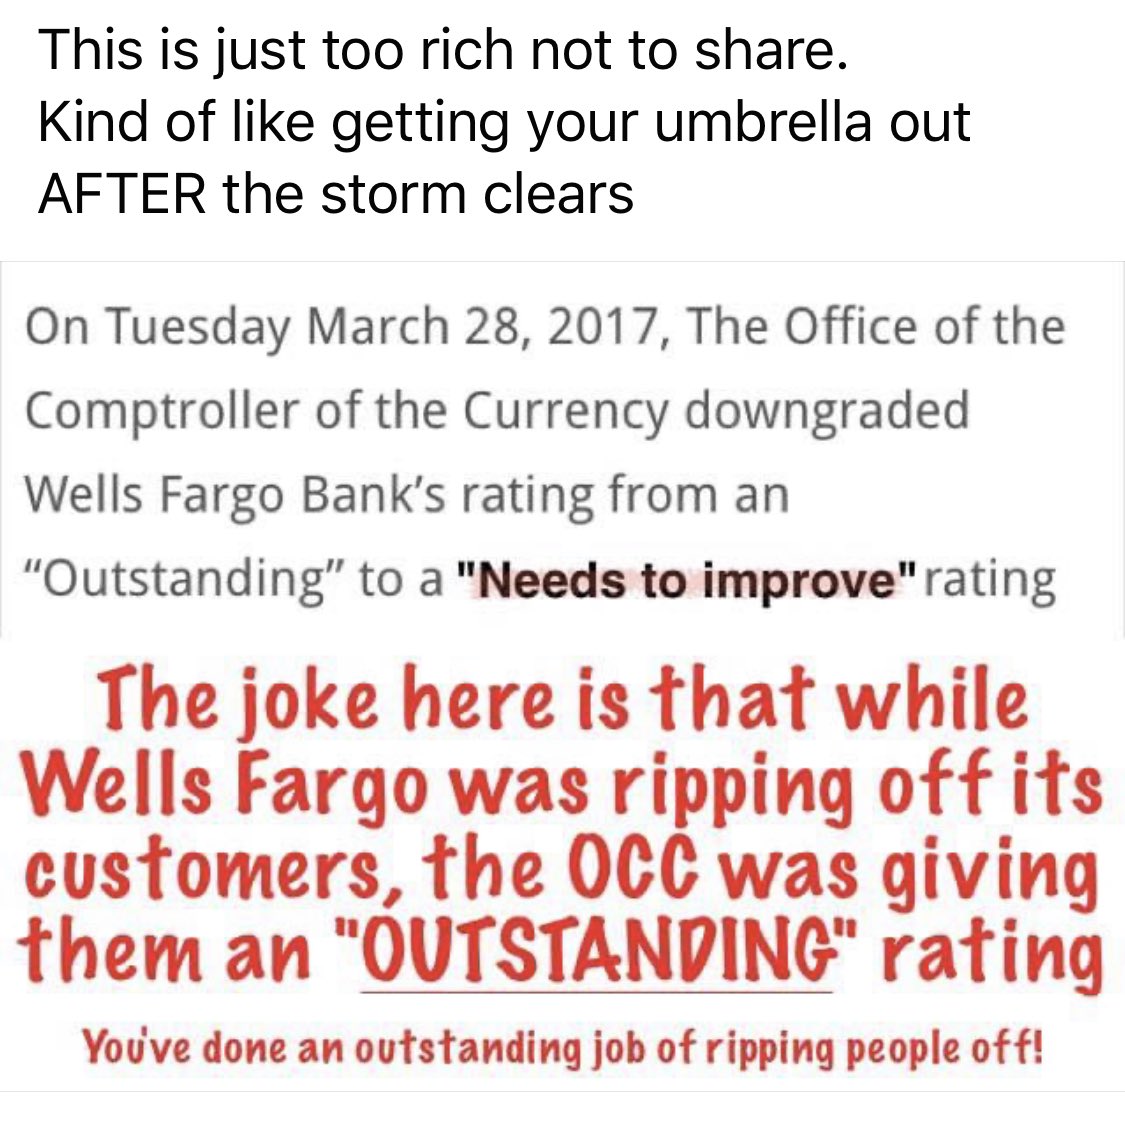 So while ⁦@WellsFargo⁩ was stealing from customers, the ⁦@USOCC⁩ was giving them an outstanding rating